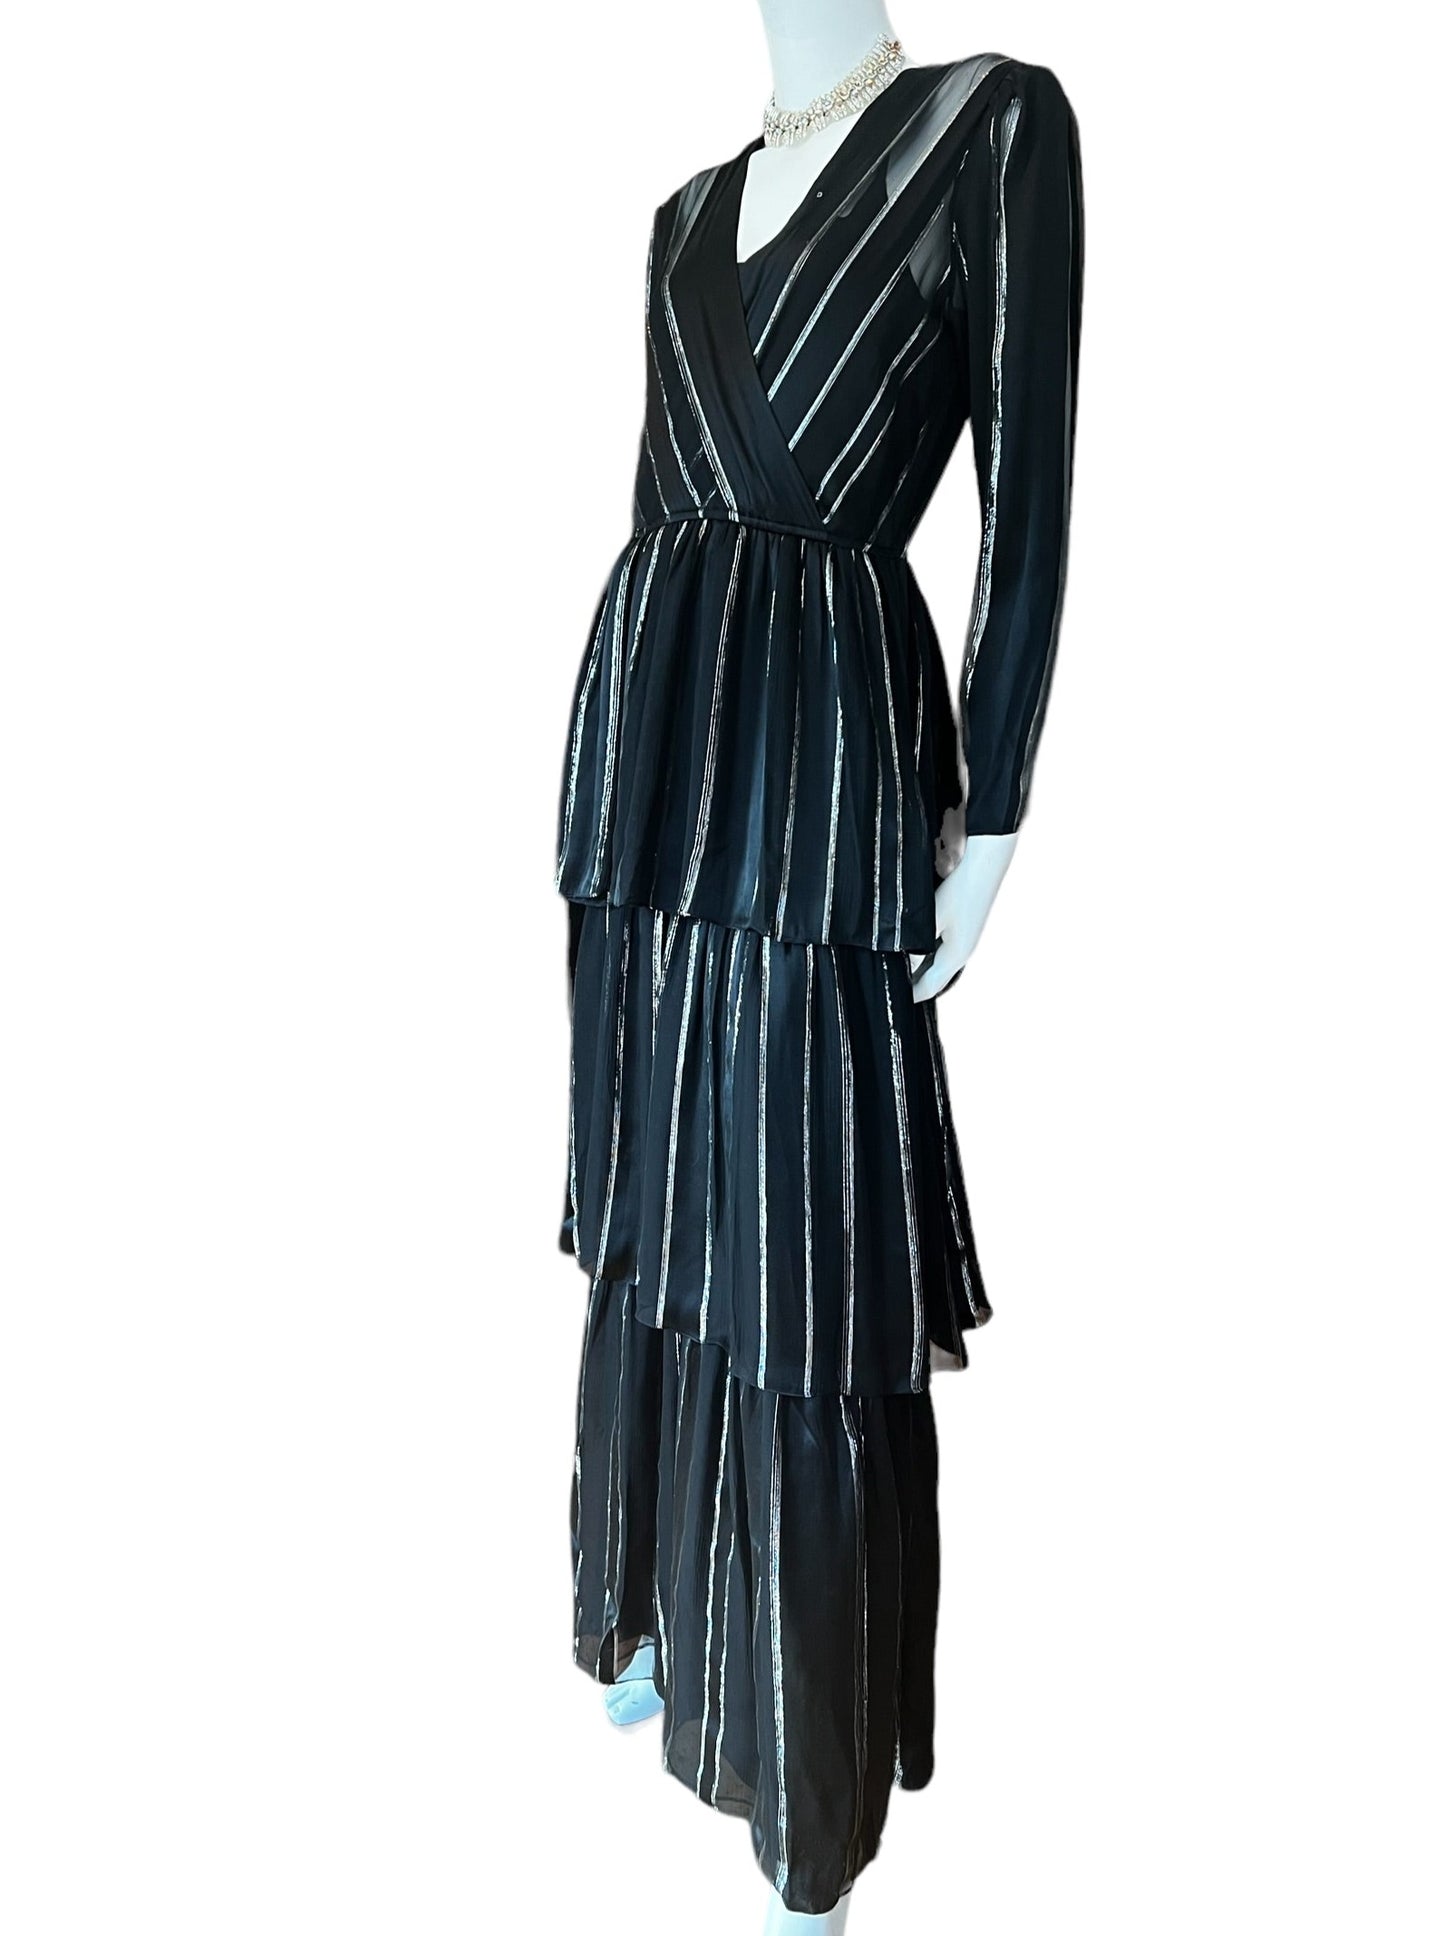 100% silk gown with a v-neck wrap dress effect, black and silver stripes, and tulle and silk tiers - formal vintage gown